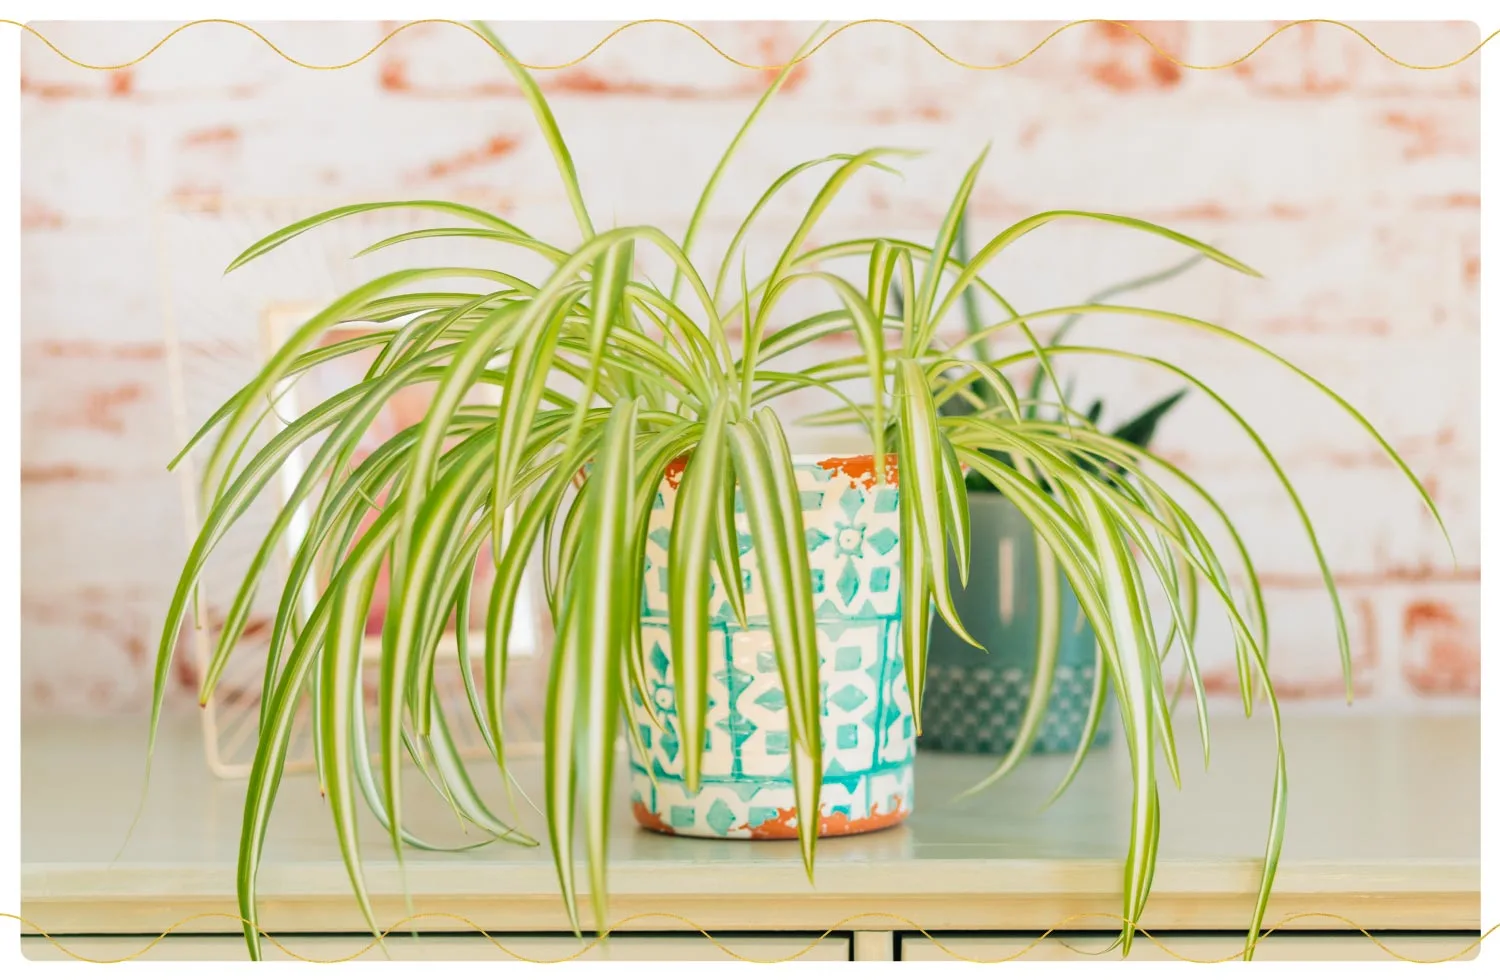 The 23 Best Air-Purifying Plants for Your Home